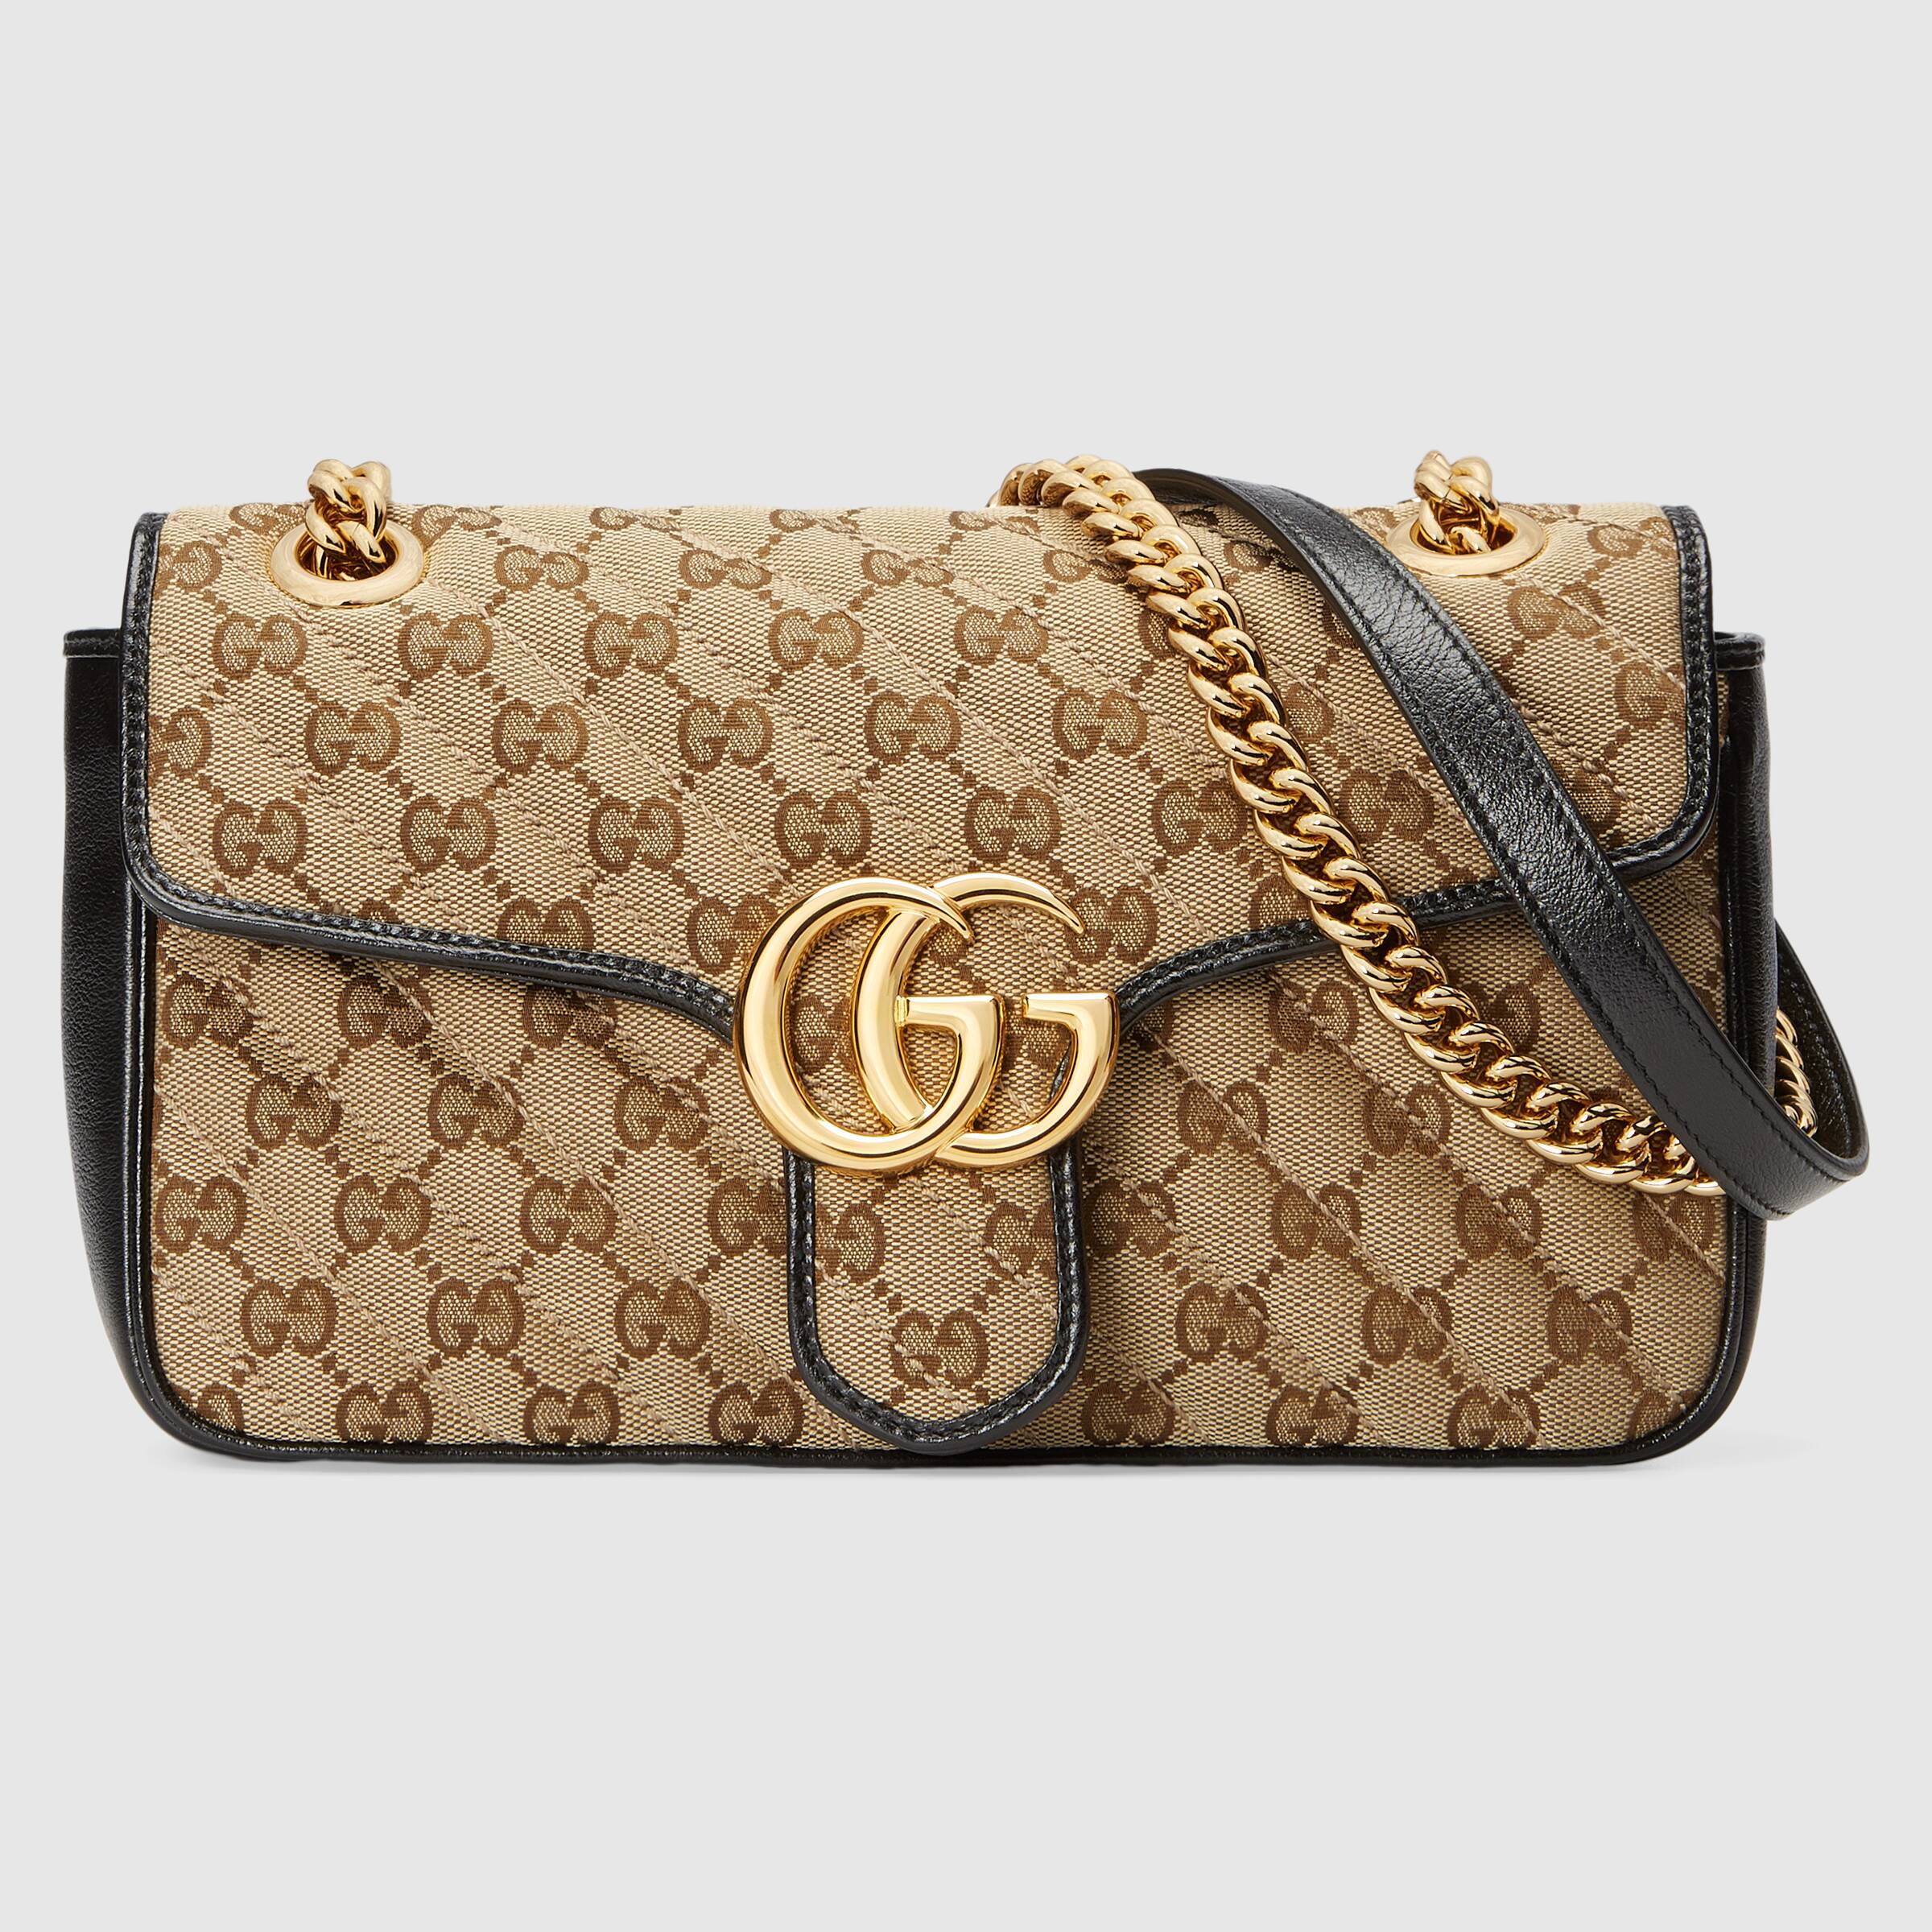 New Gucci Iconic GG Marmont Bag in Monogram Canvas